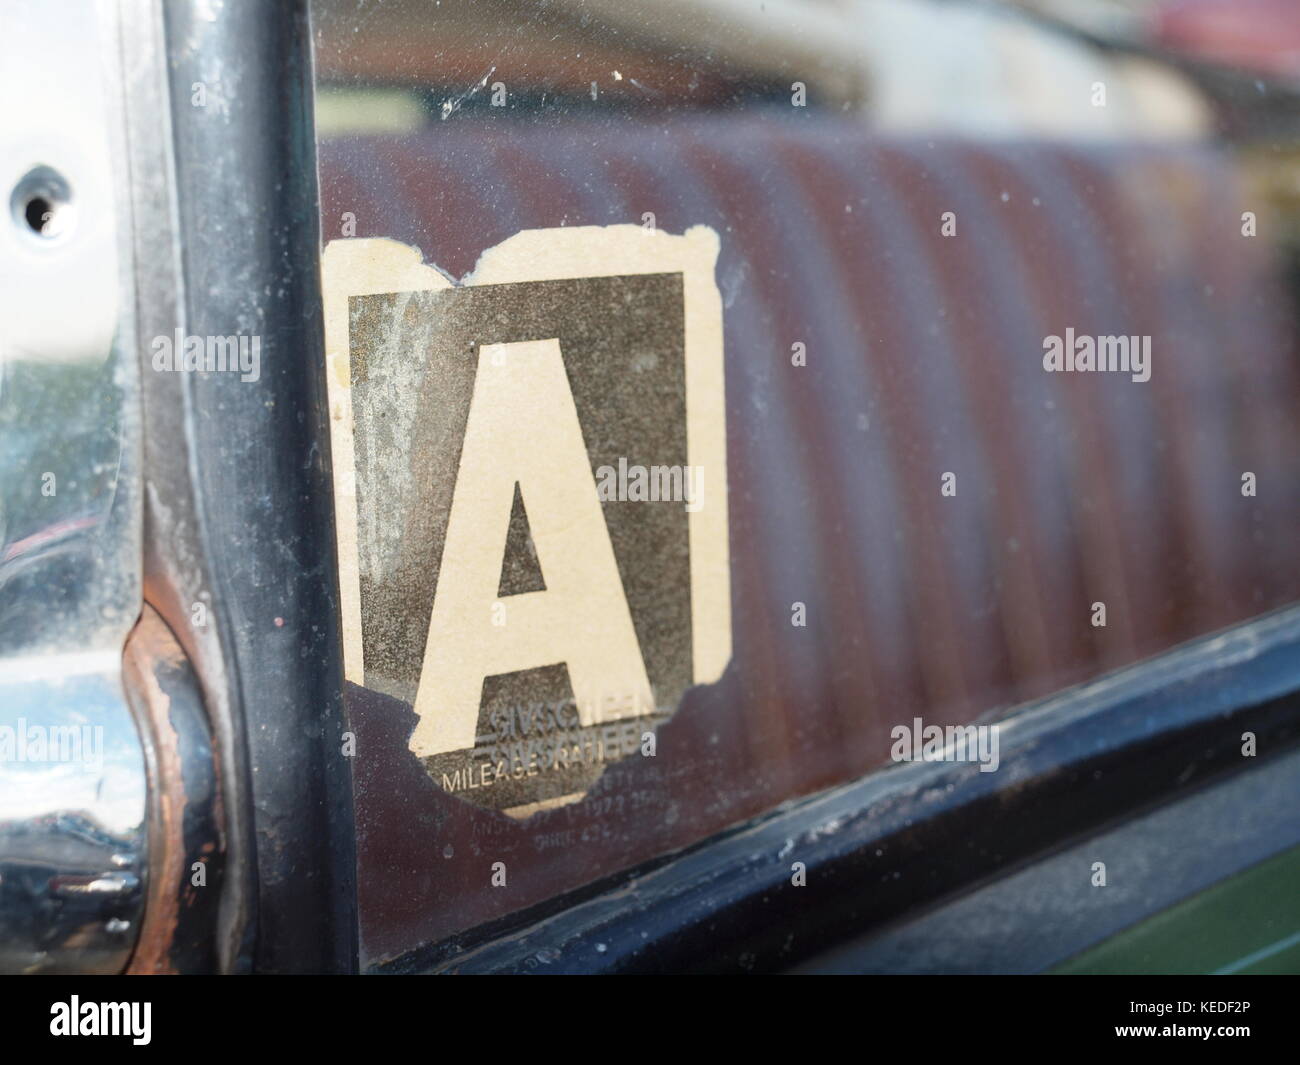 Details of classic cars. Showing the craftsmanship, the history and the art involved. Stock Photo